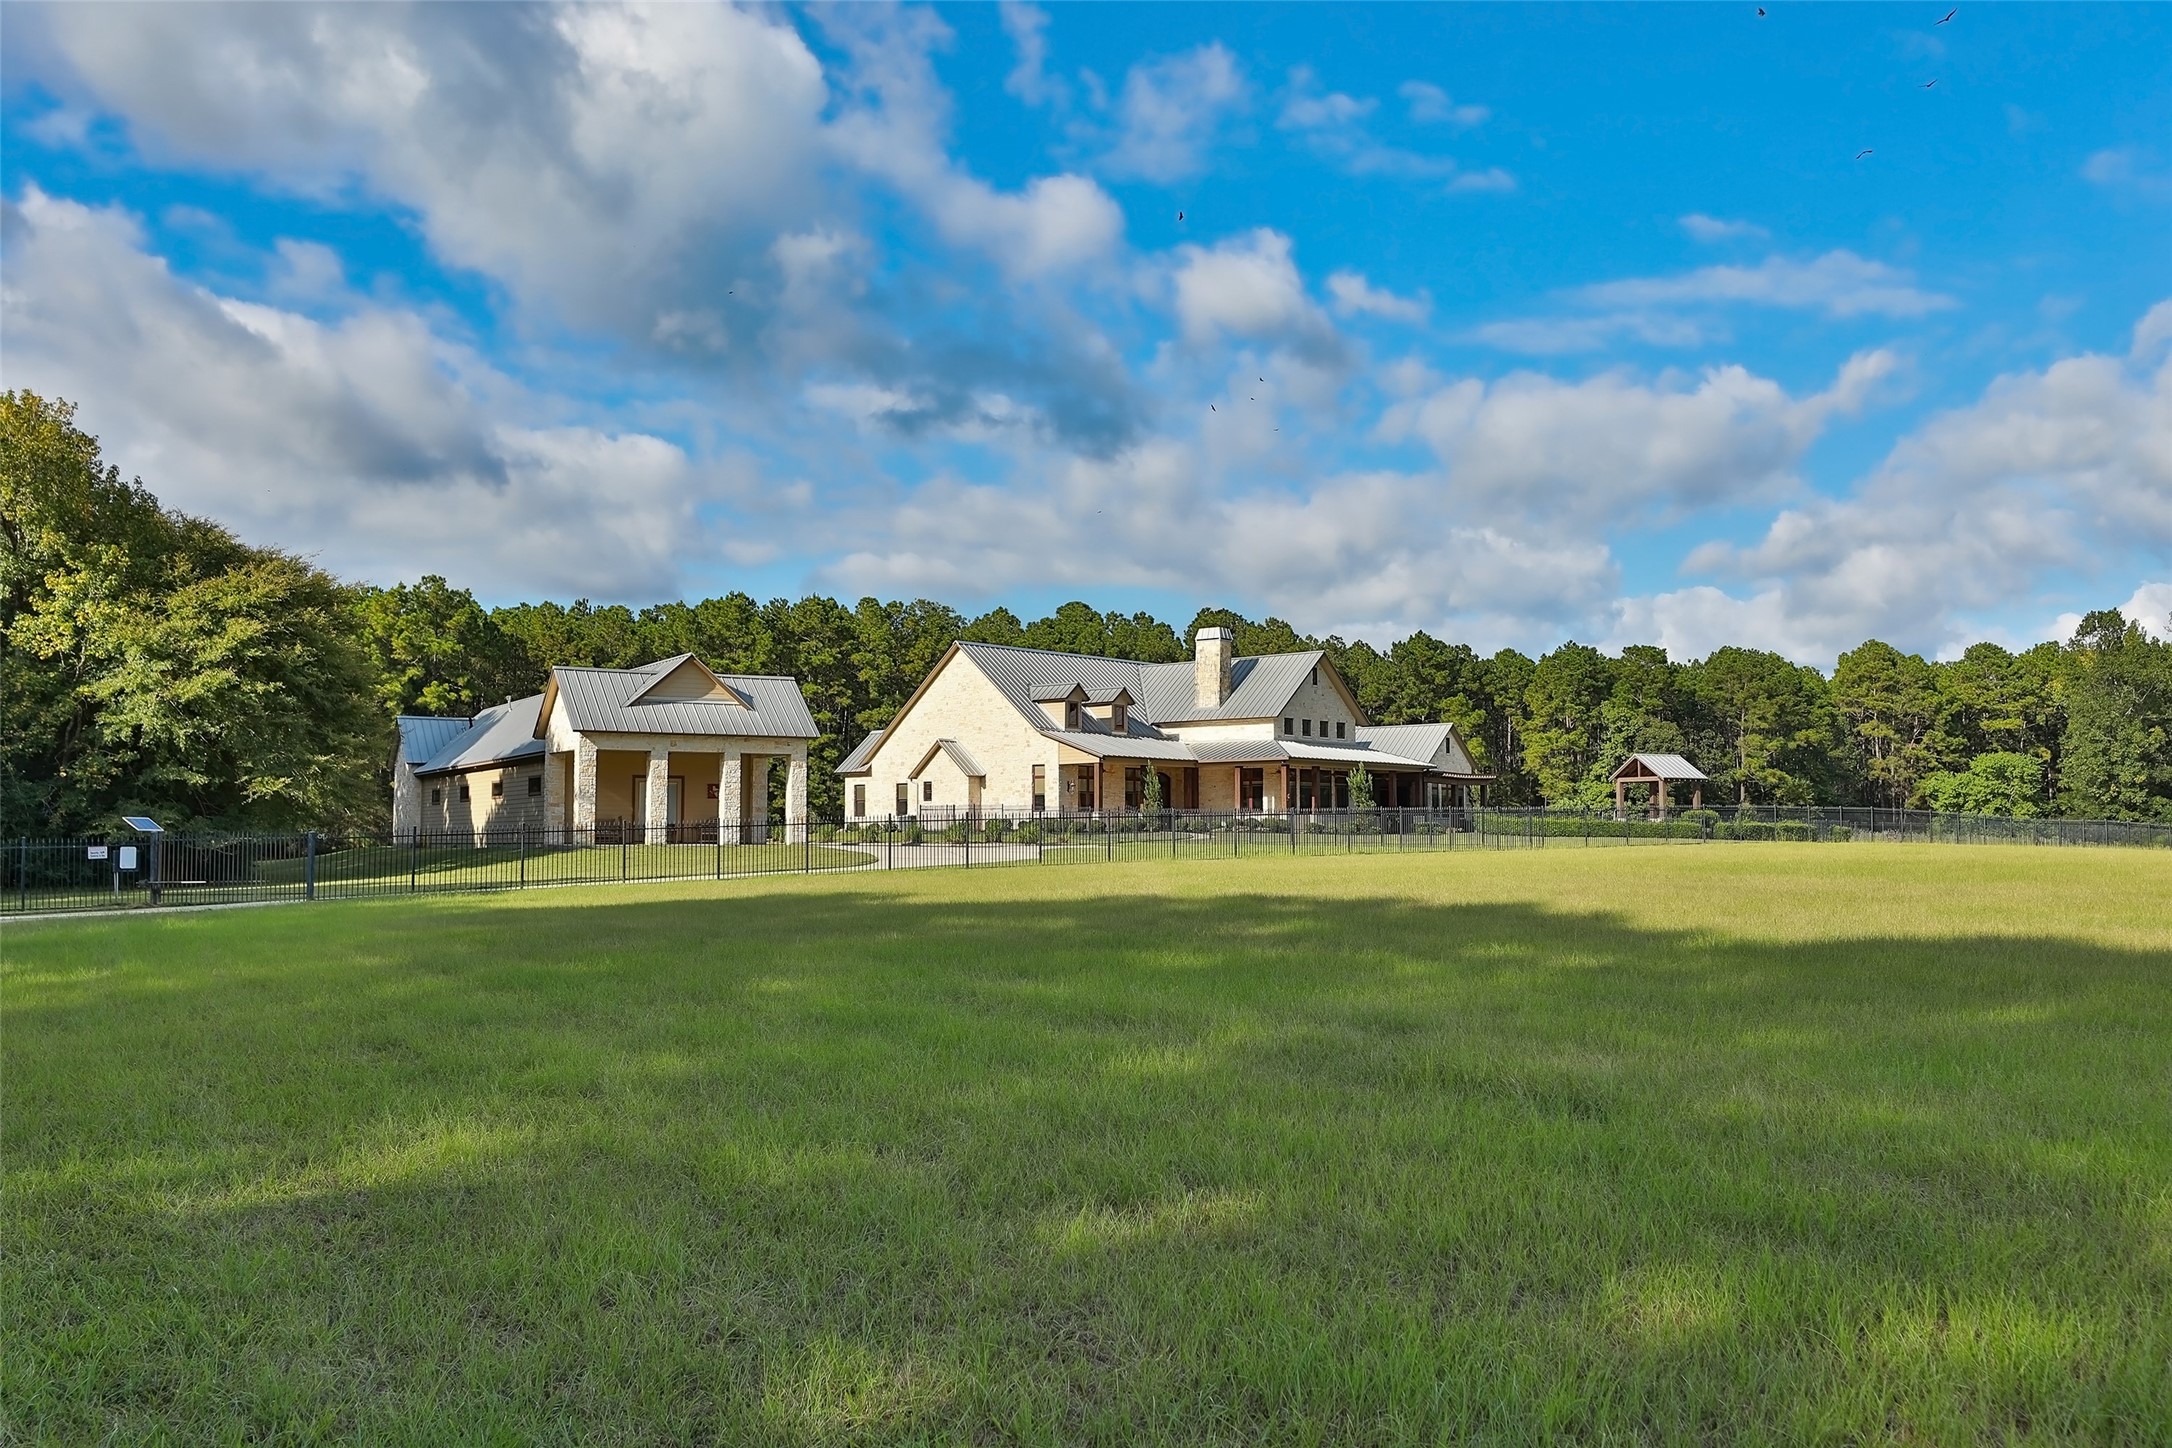 A view from the acreage to this stunning sprawling house.